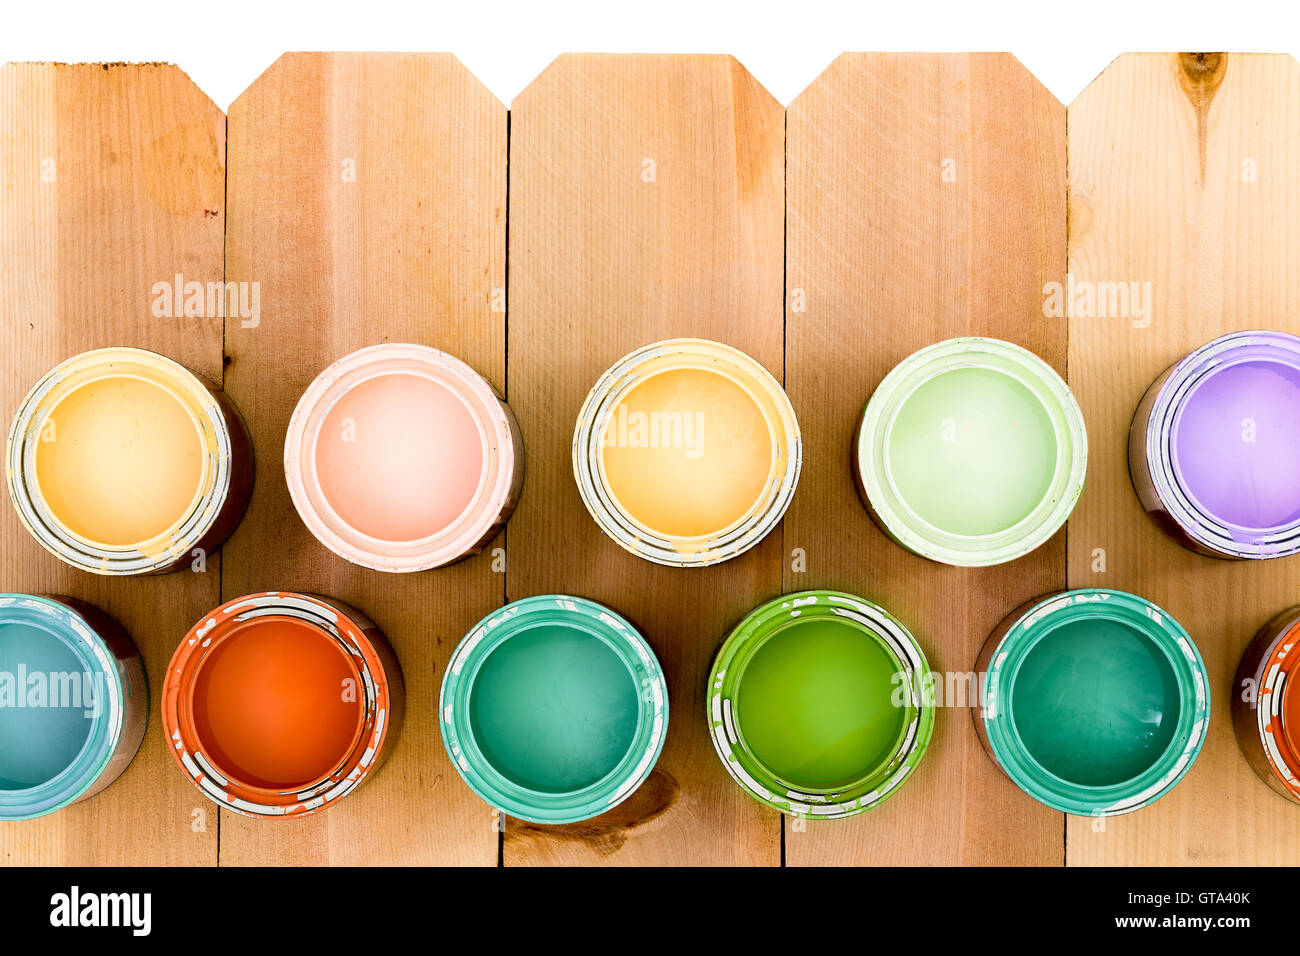 Opened pots of colorful wood stain arranged as a lower border on a natural wooden picket fence offering a choice of colors to su Stock Photo